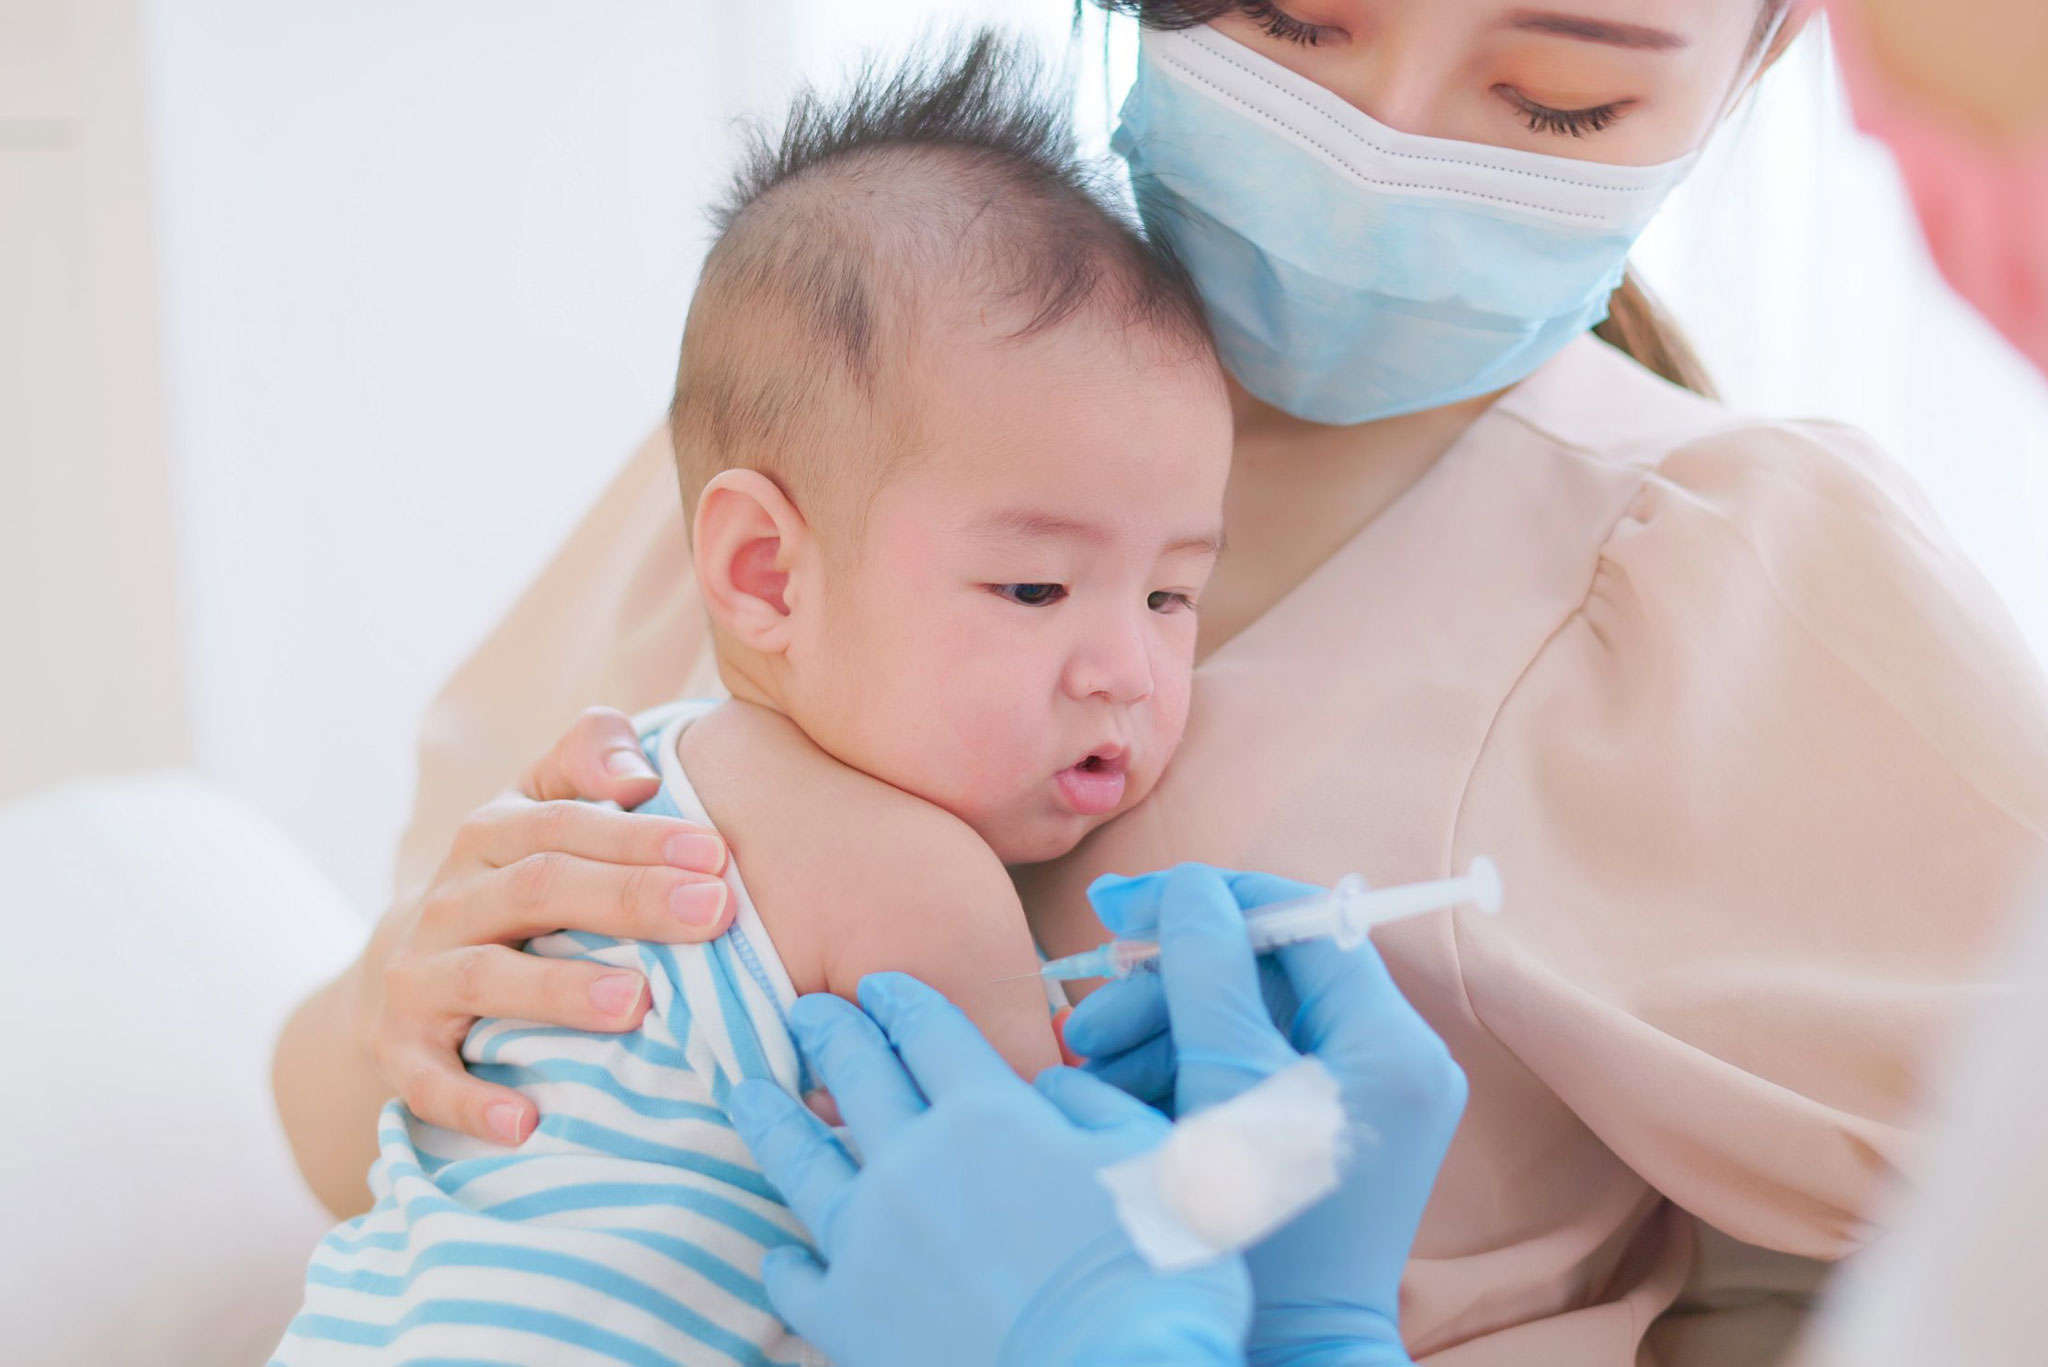 Mother holds her baby as she's vaccinated by her doctor. A new study shows a possible association between exposure to aluminum in some childhood vaccinations and asthma in young children.